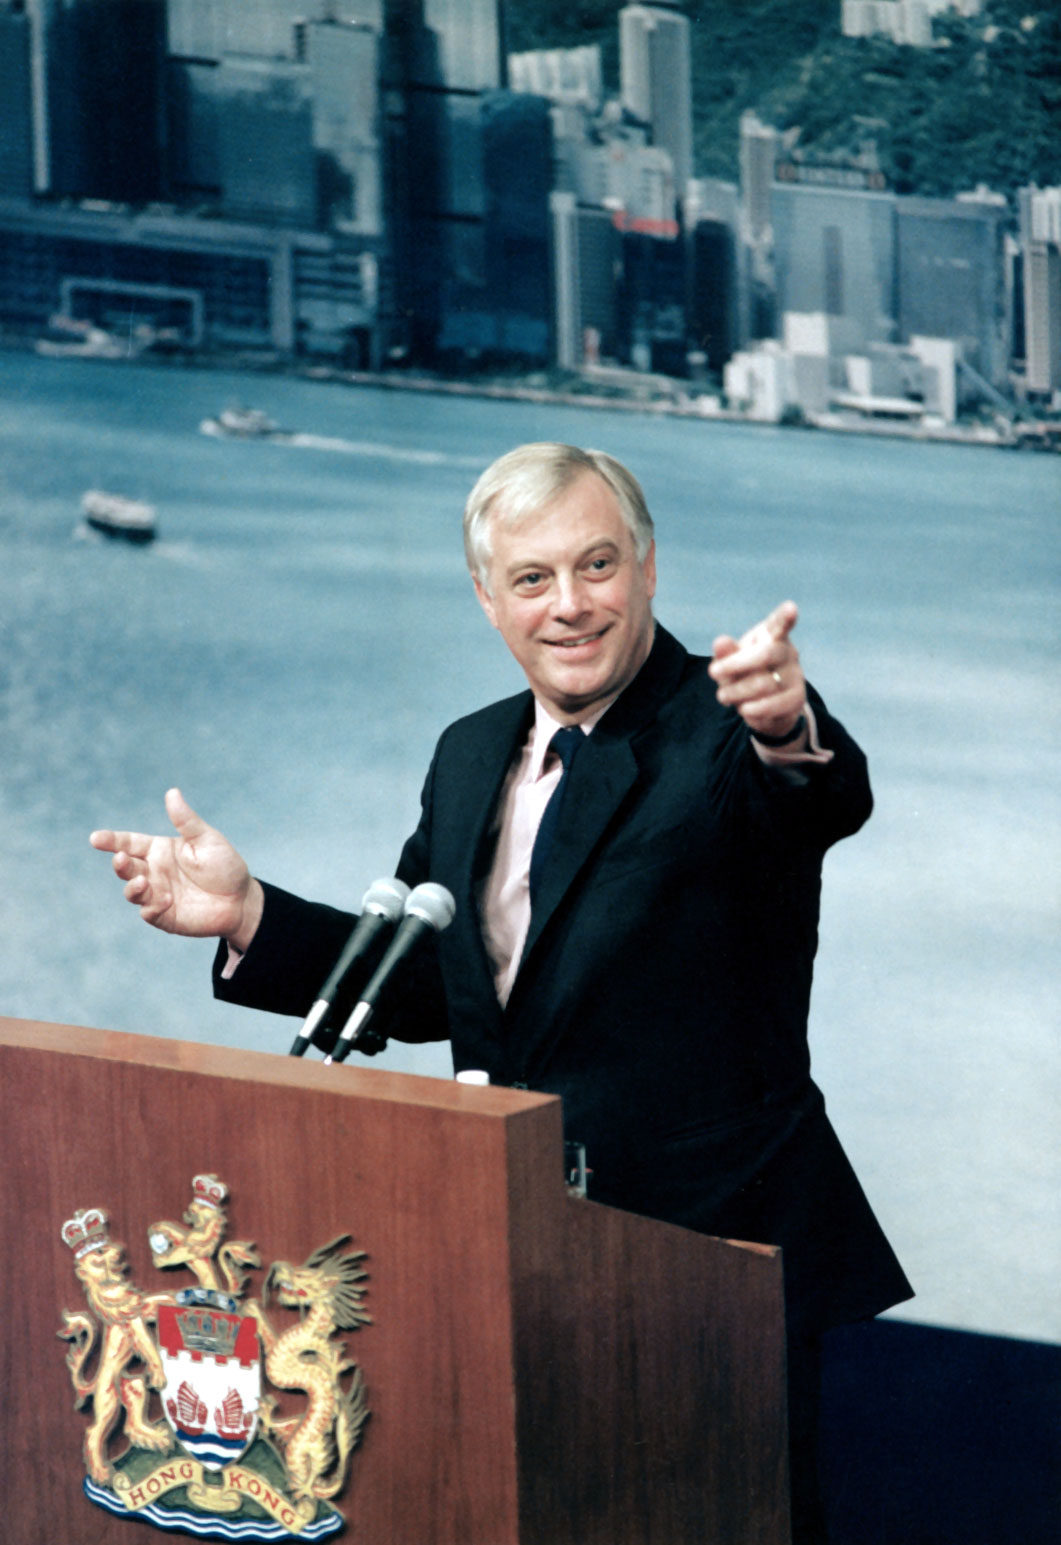 New arrived Governor Chris Patten uses both hands to keep up with the questions of the audience about his democratic proposols at the Question and Answer Forum (Q&amp;A), 8 Oct 92.